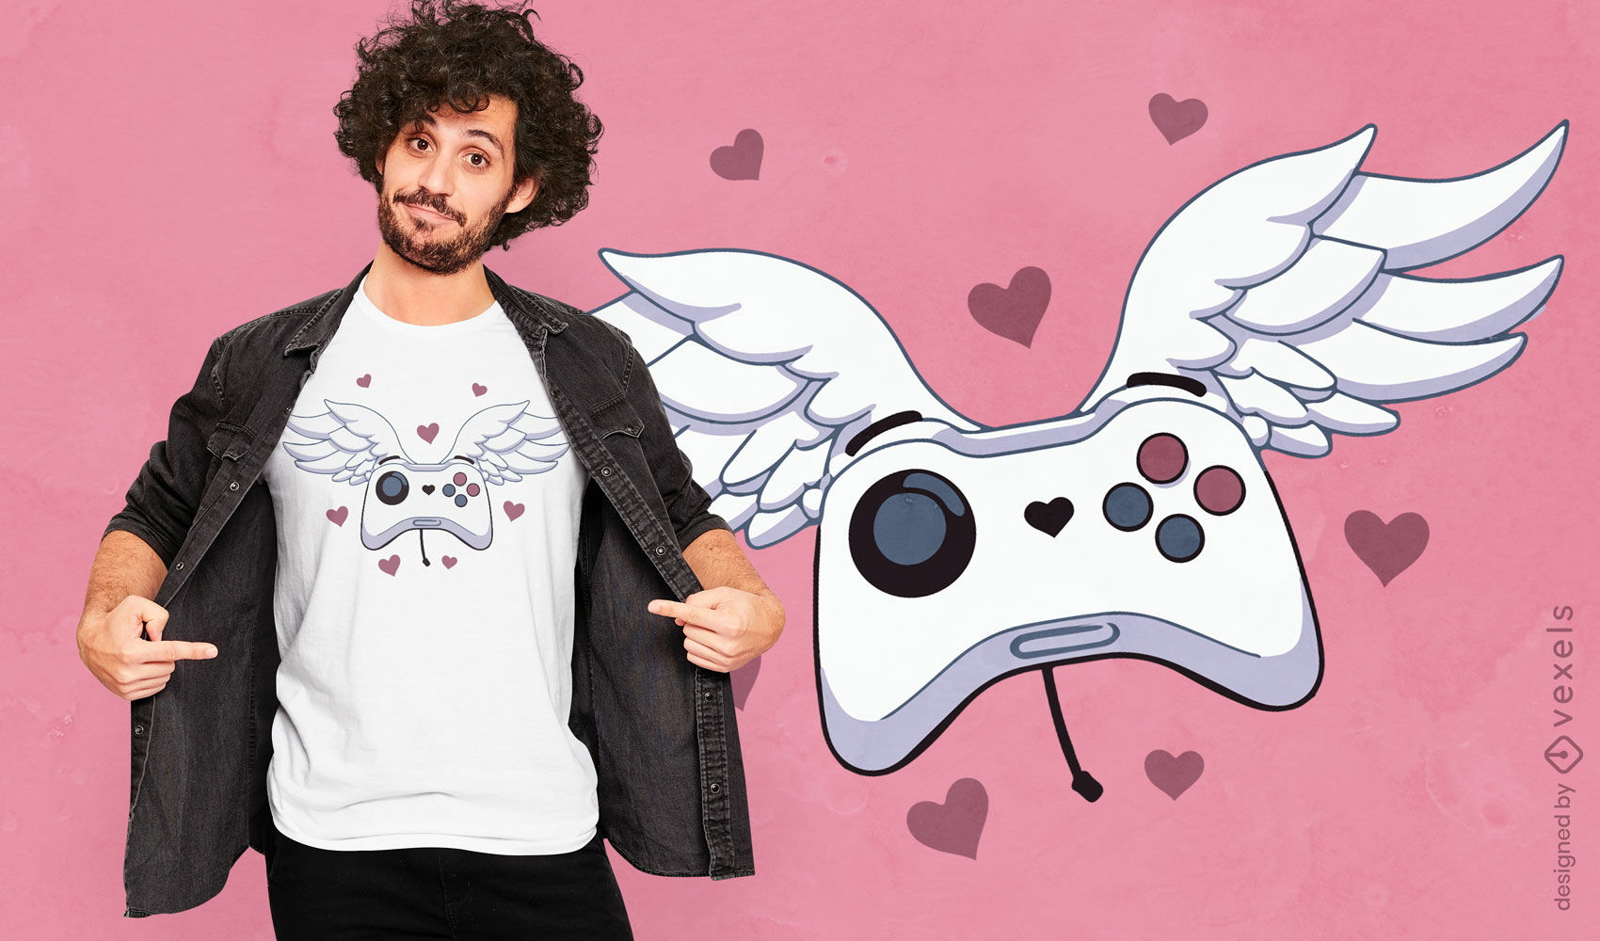 Game controller with wings t-shirt design